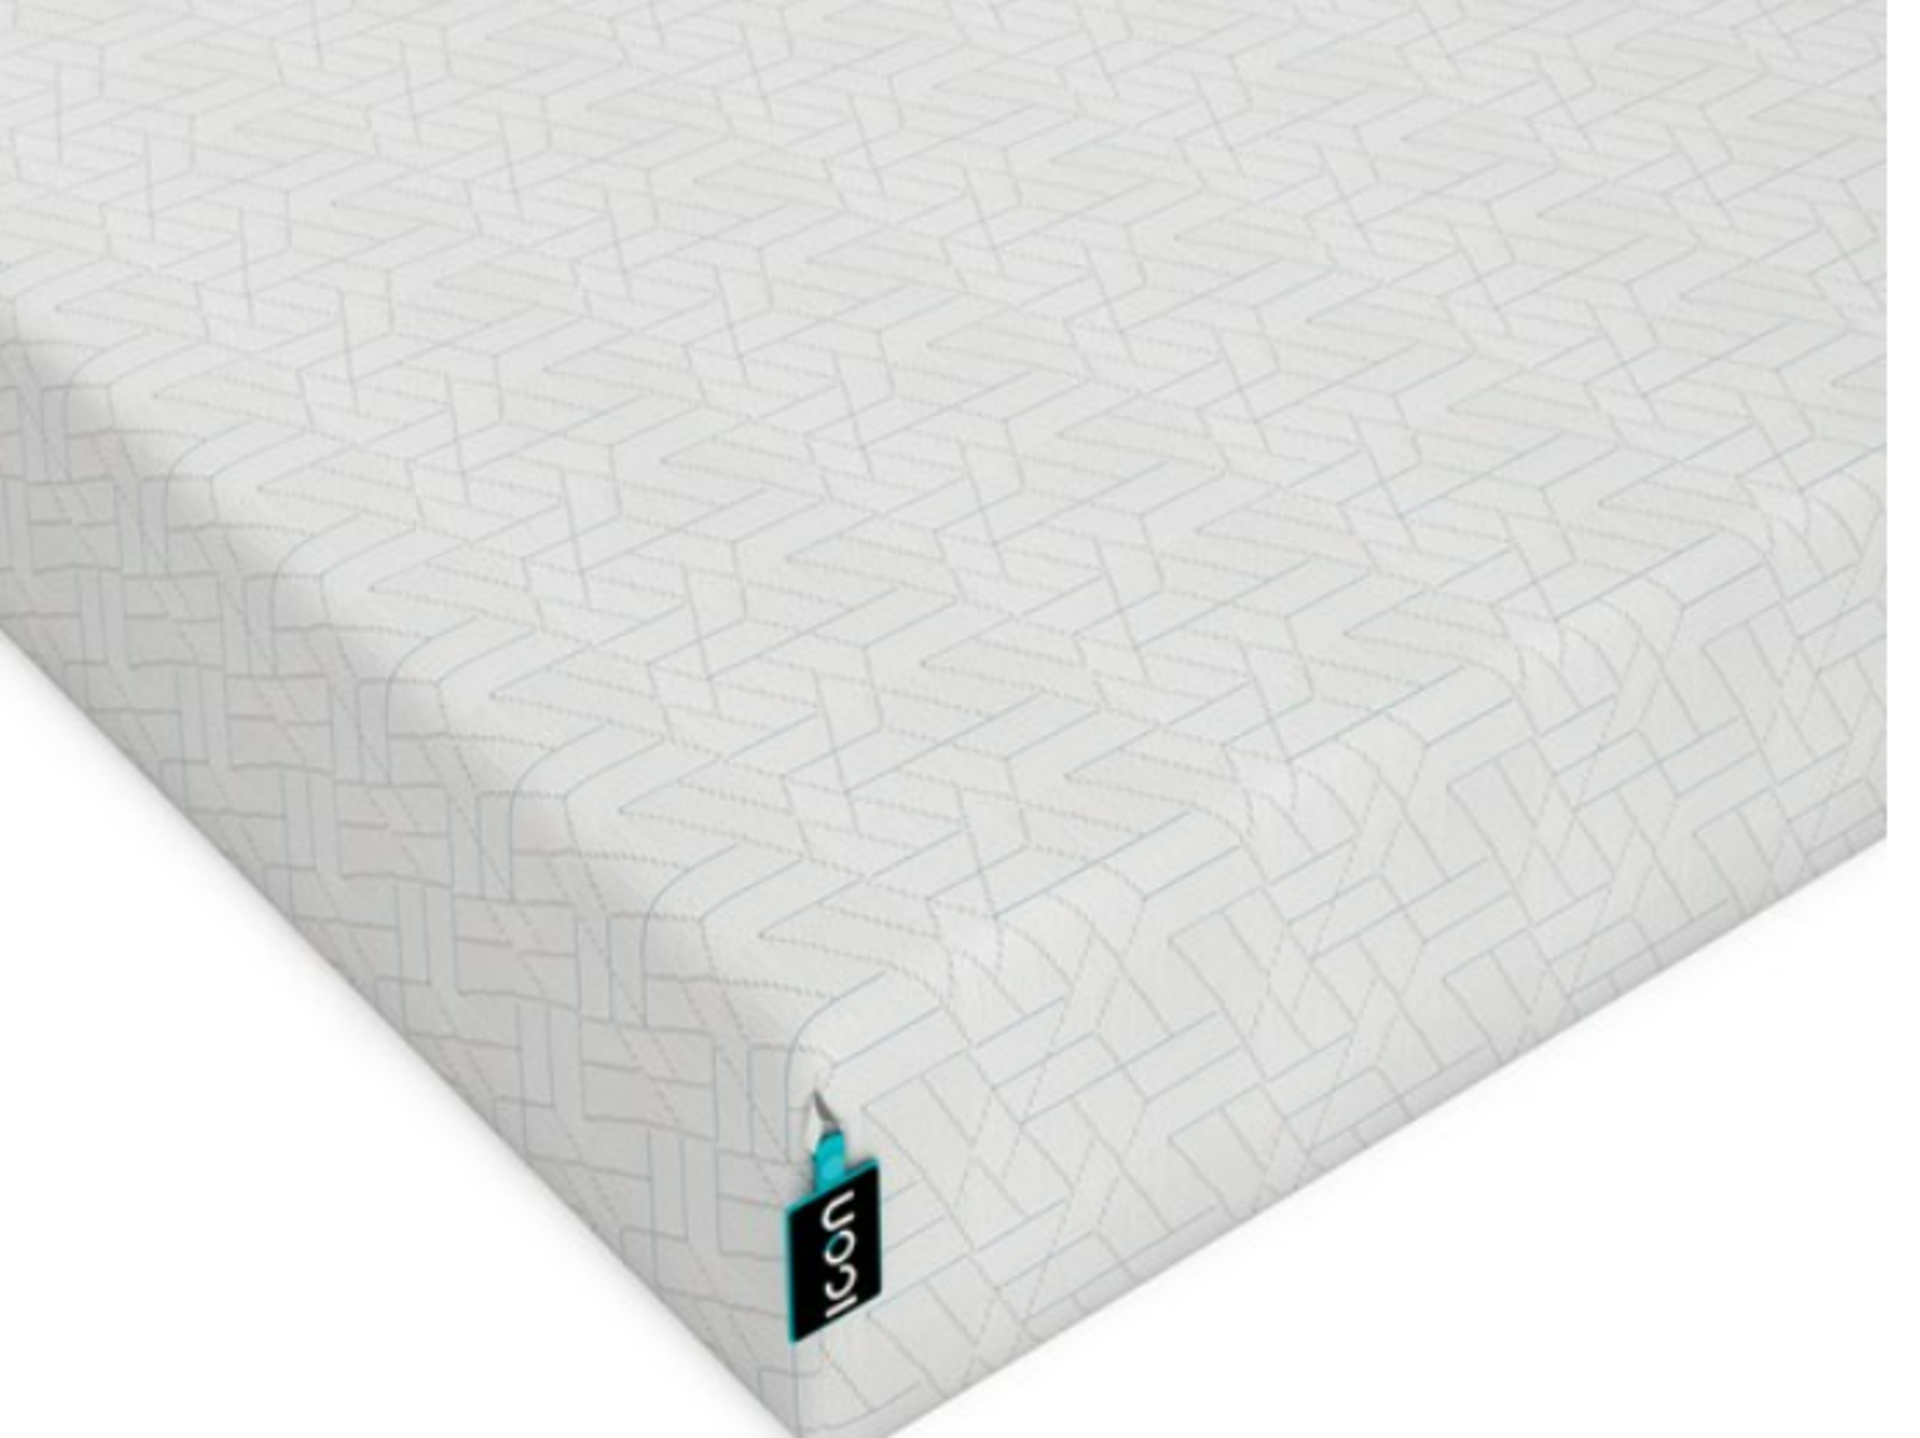 | 1X |˜ UNIDENTIFIED SINGLE MEMORY FOAM MATTRESS | STILL ROLLED AND BAGGED | RRP ?- |